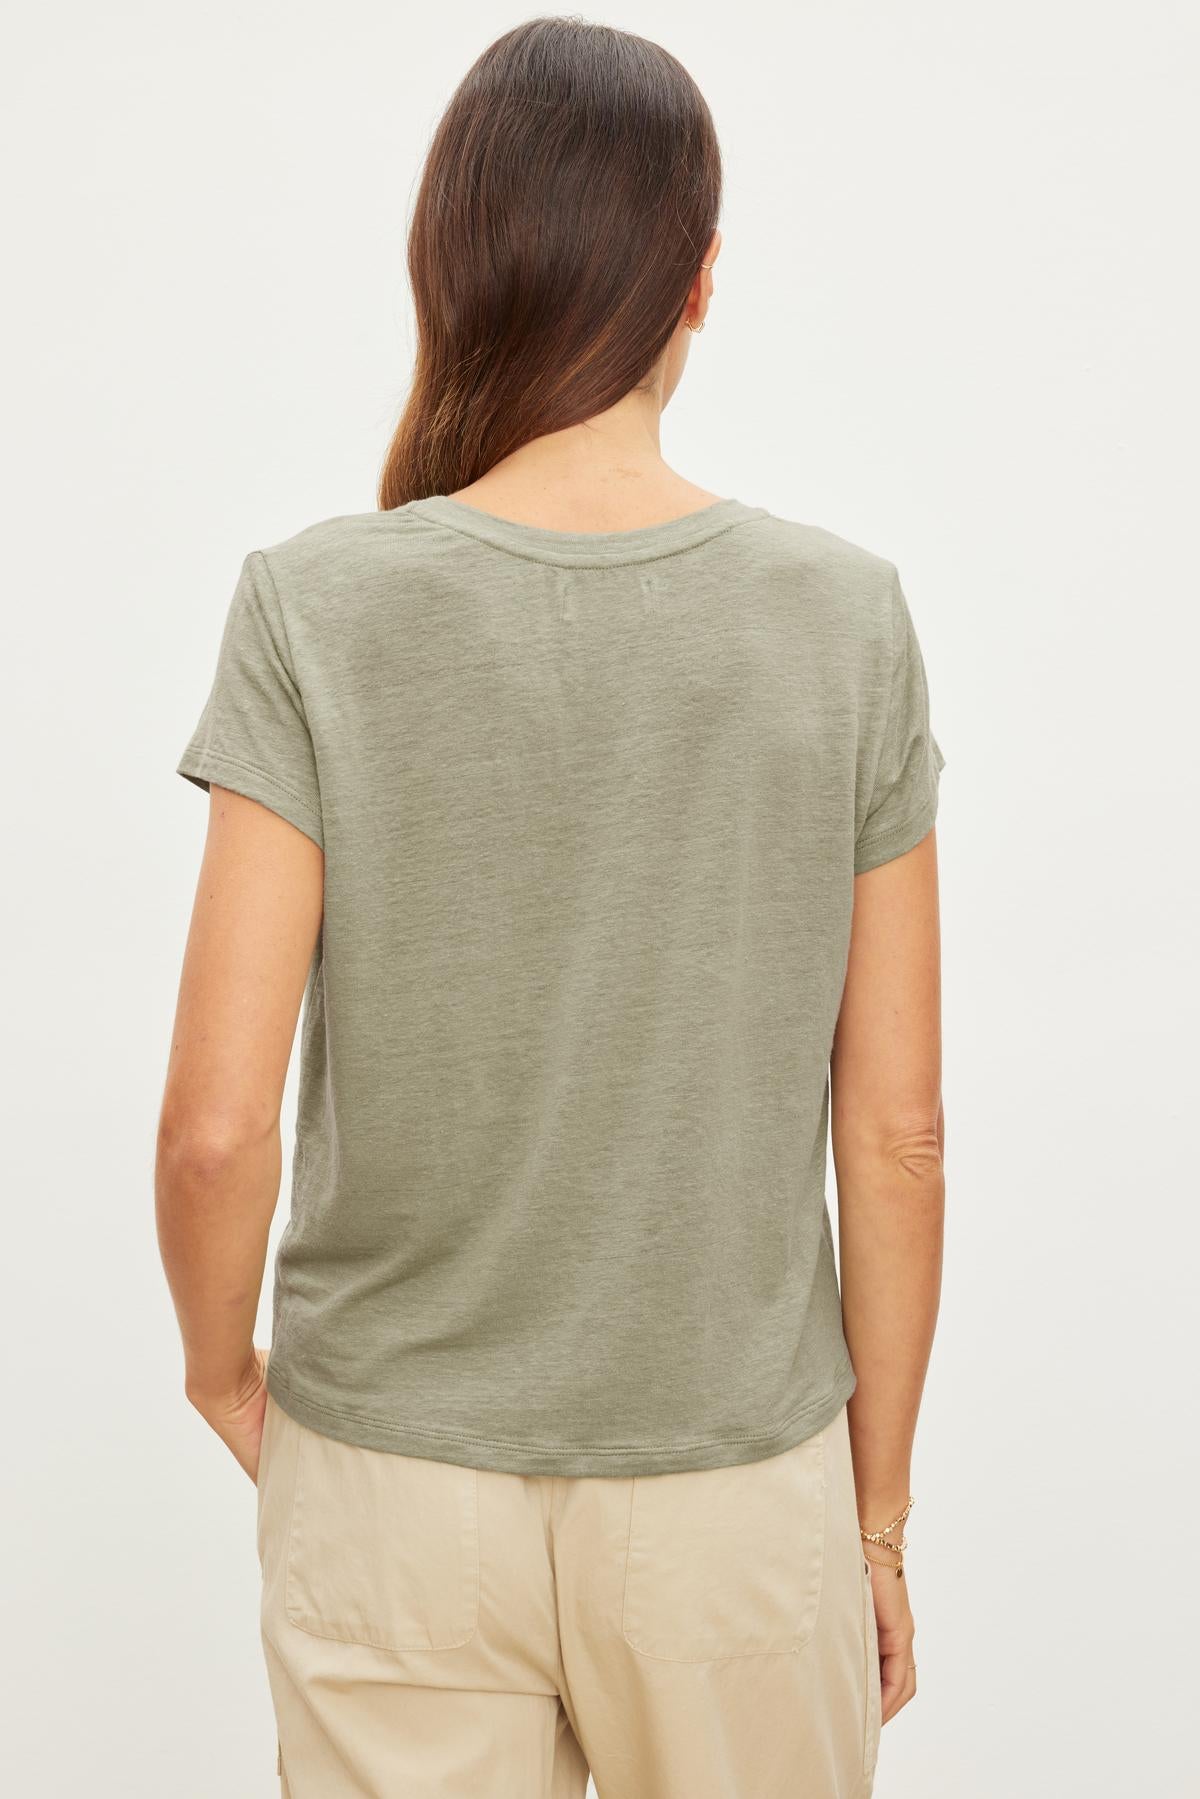 Rear view of a woman wearing a Velvet by Graham & Spencer CASEY LINEN KNIT CREW NECK TEE in green and beige pants, standing against a white background.-36909994115265